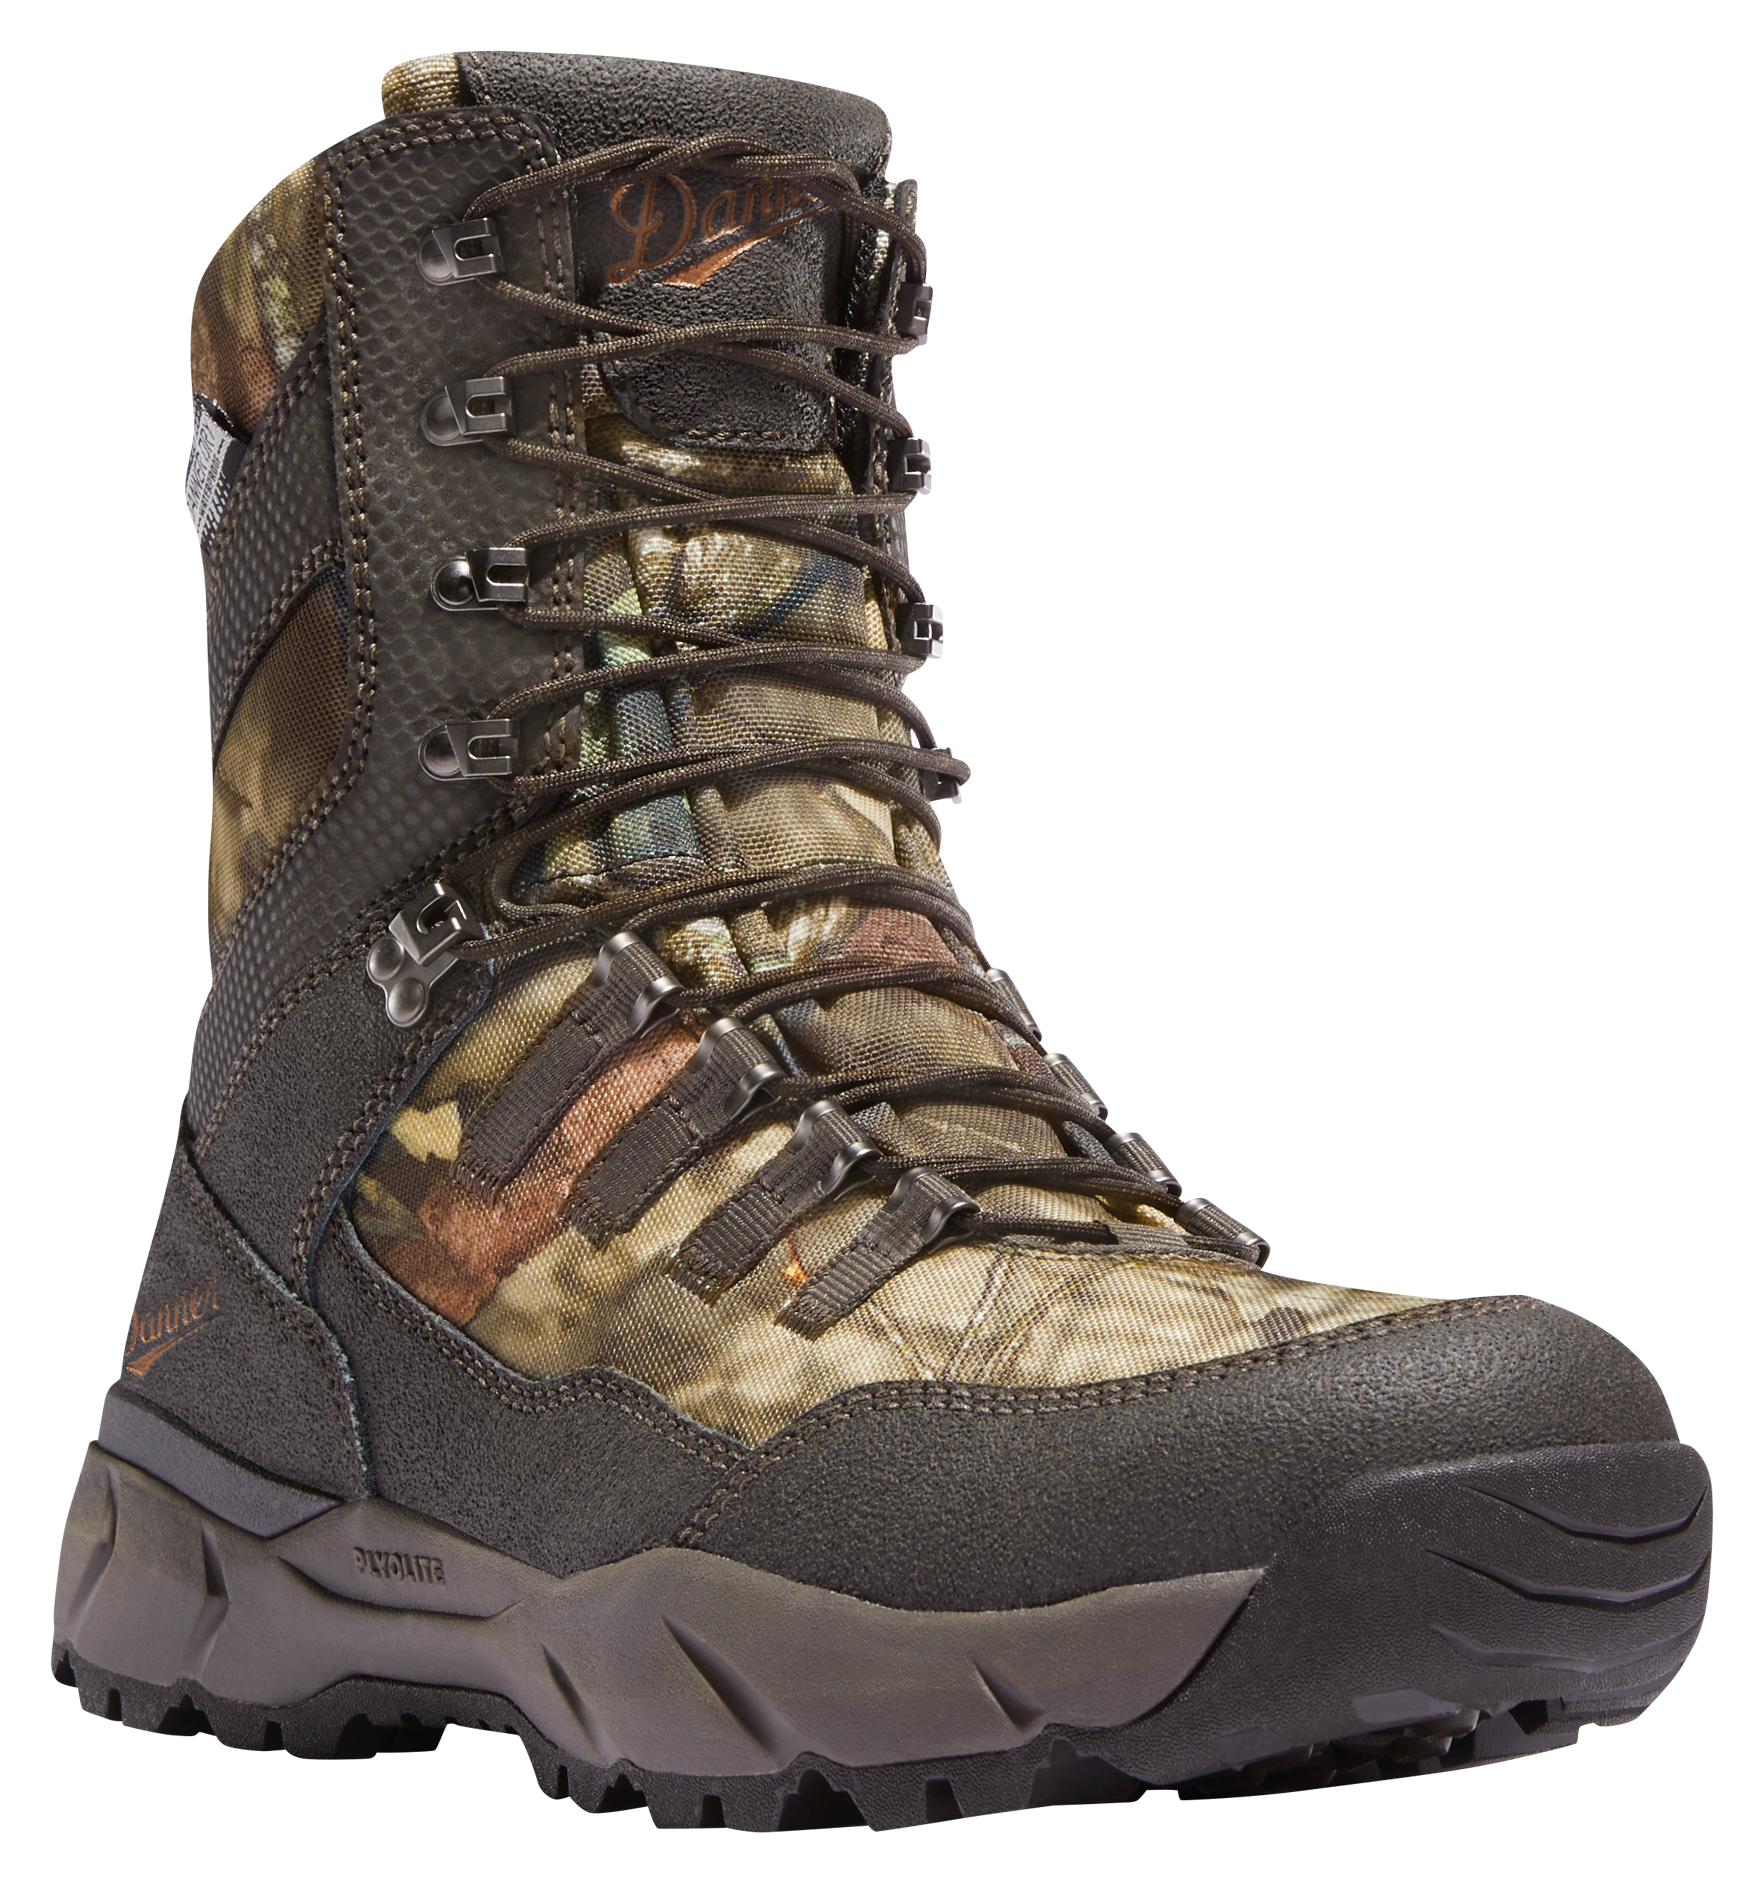 Danner Vital 400 Insulated Waterproof Hunting Boots for Men | Cabela's